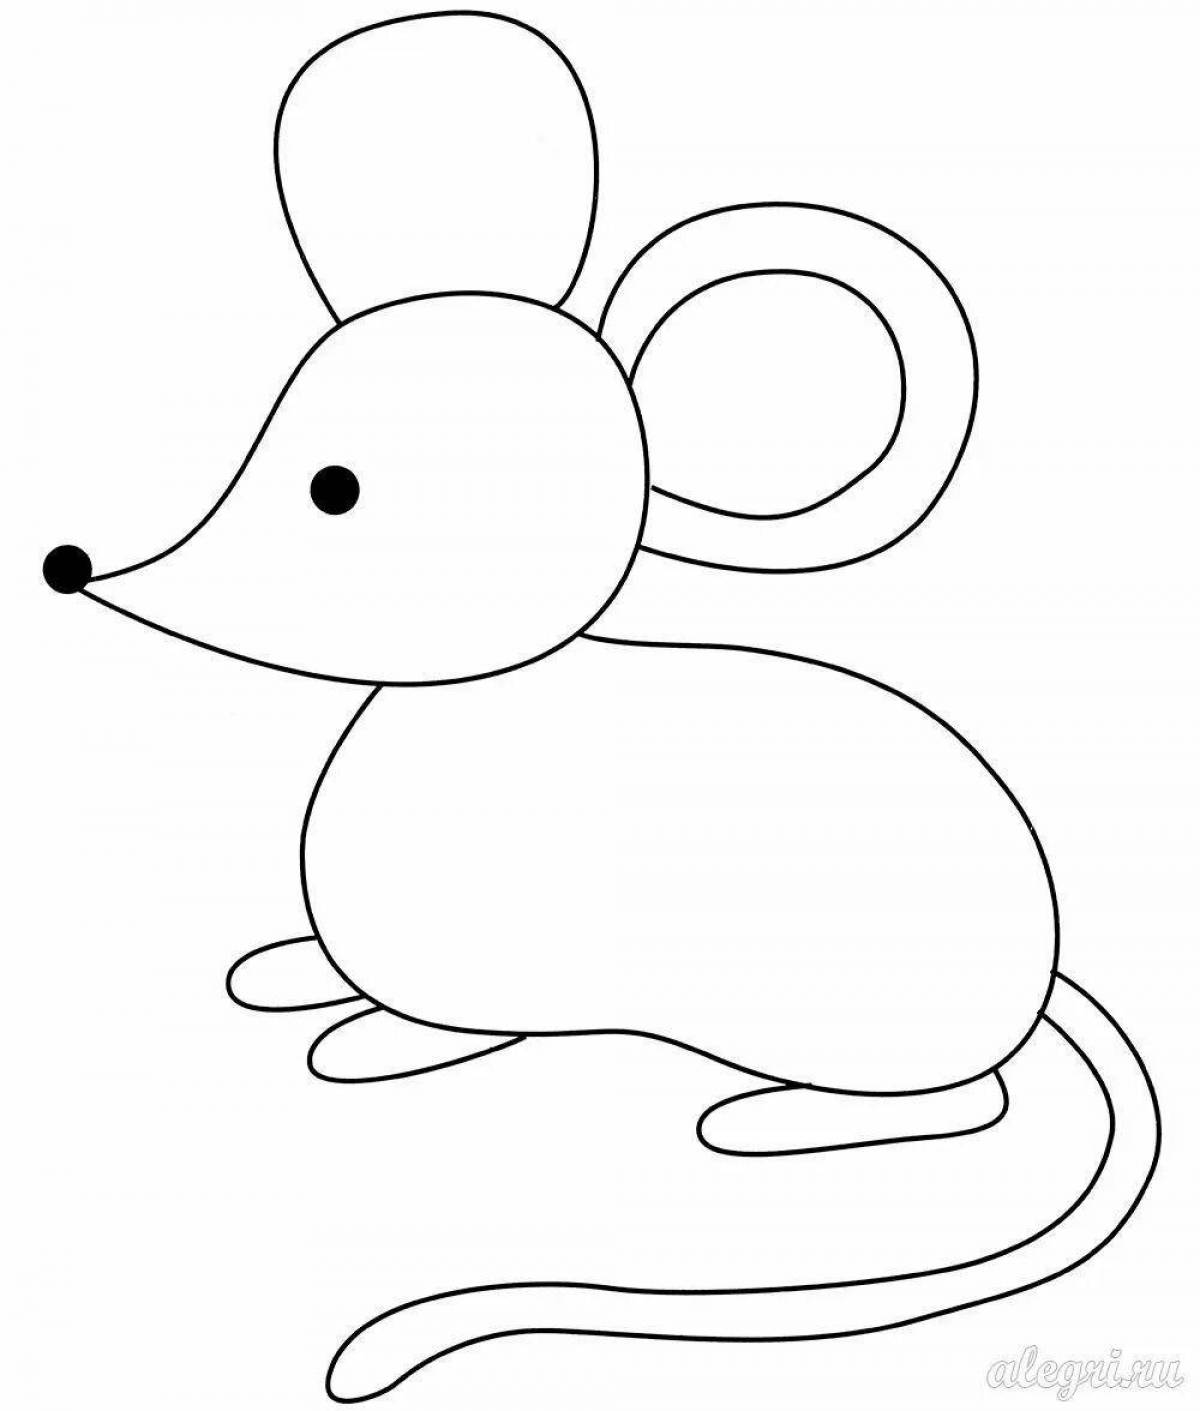 Joyful mouse coloring book for 4-5 year olds